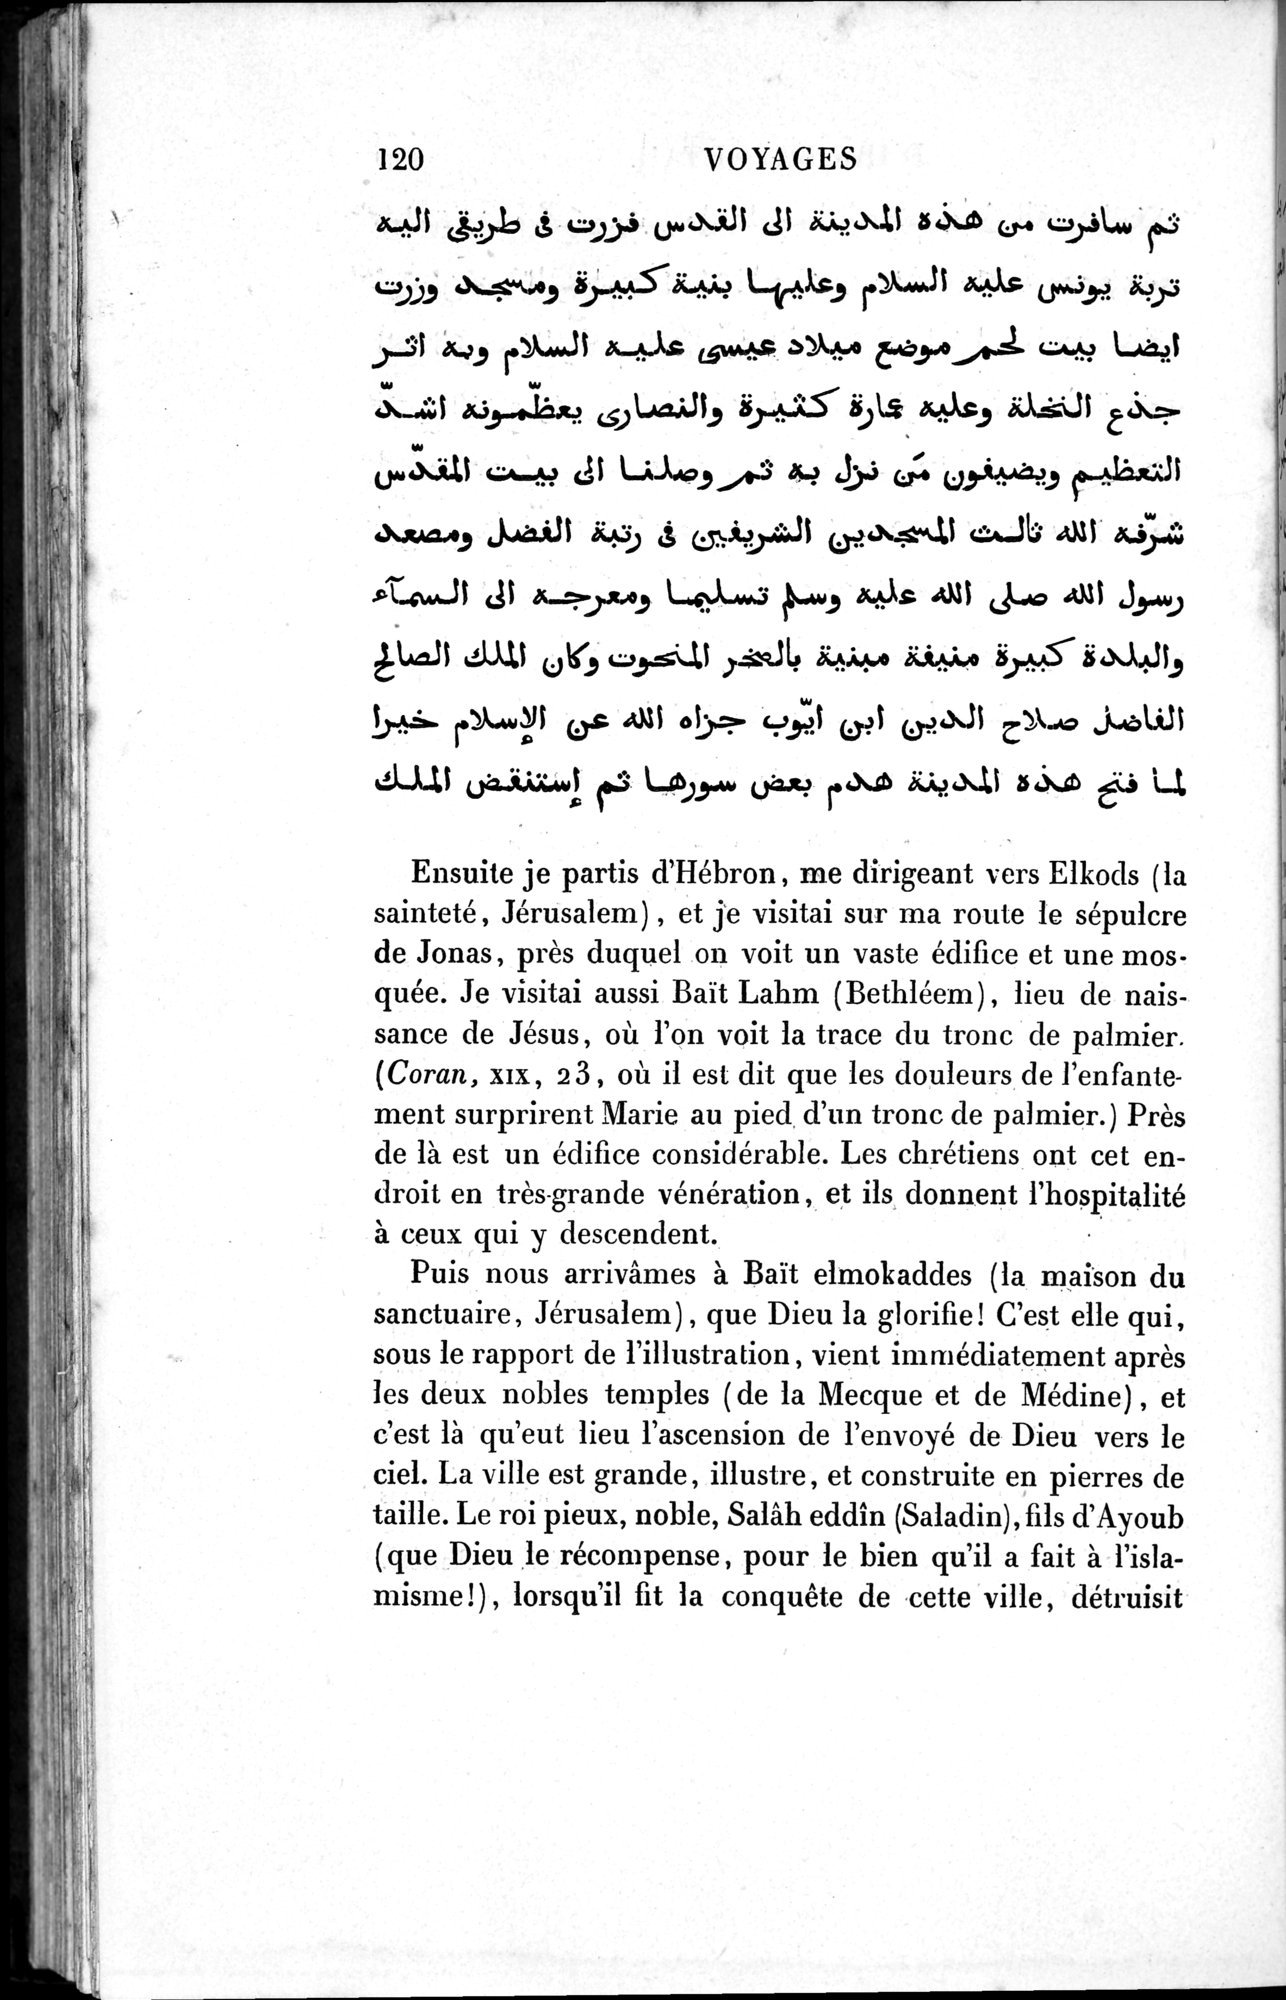 Voyages d'Ibn Batoutah : vol.1 / Page 180 (Grayscale High Resolution Image)